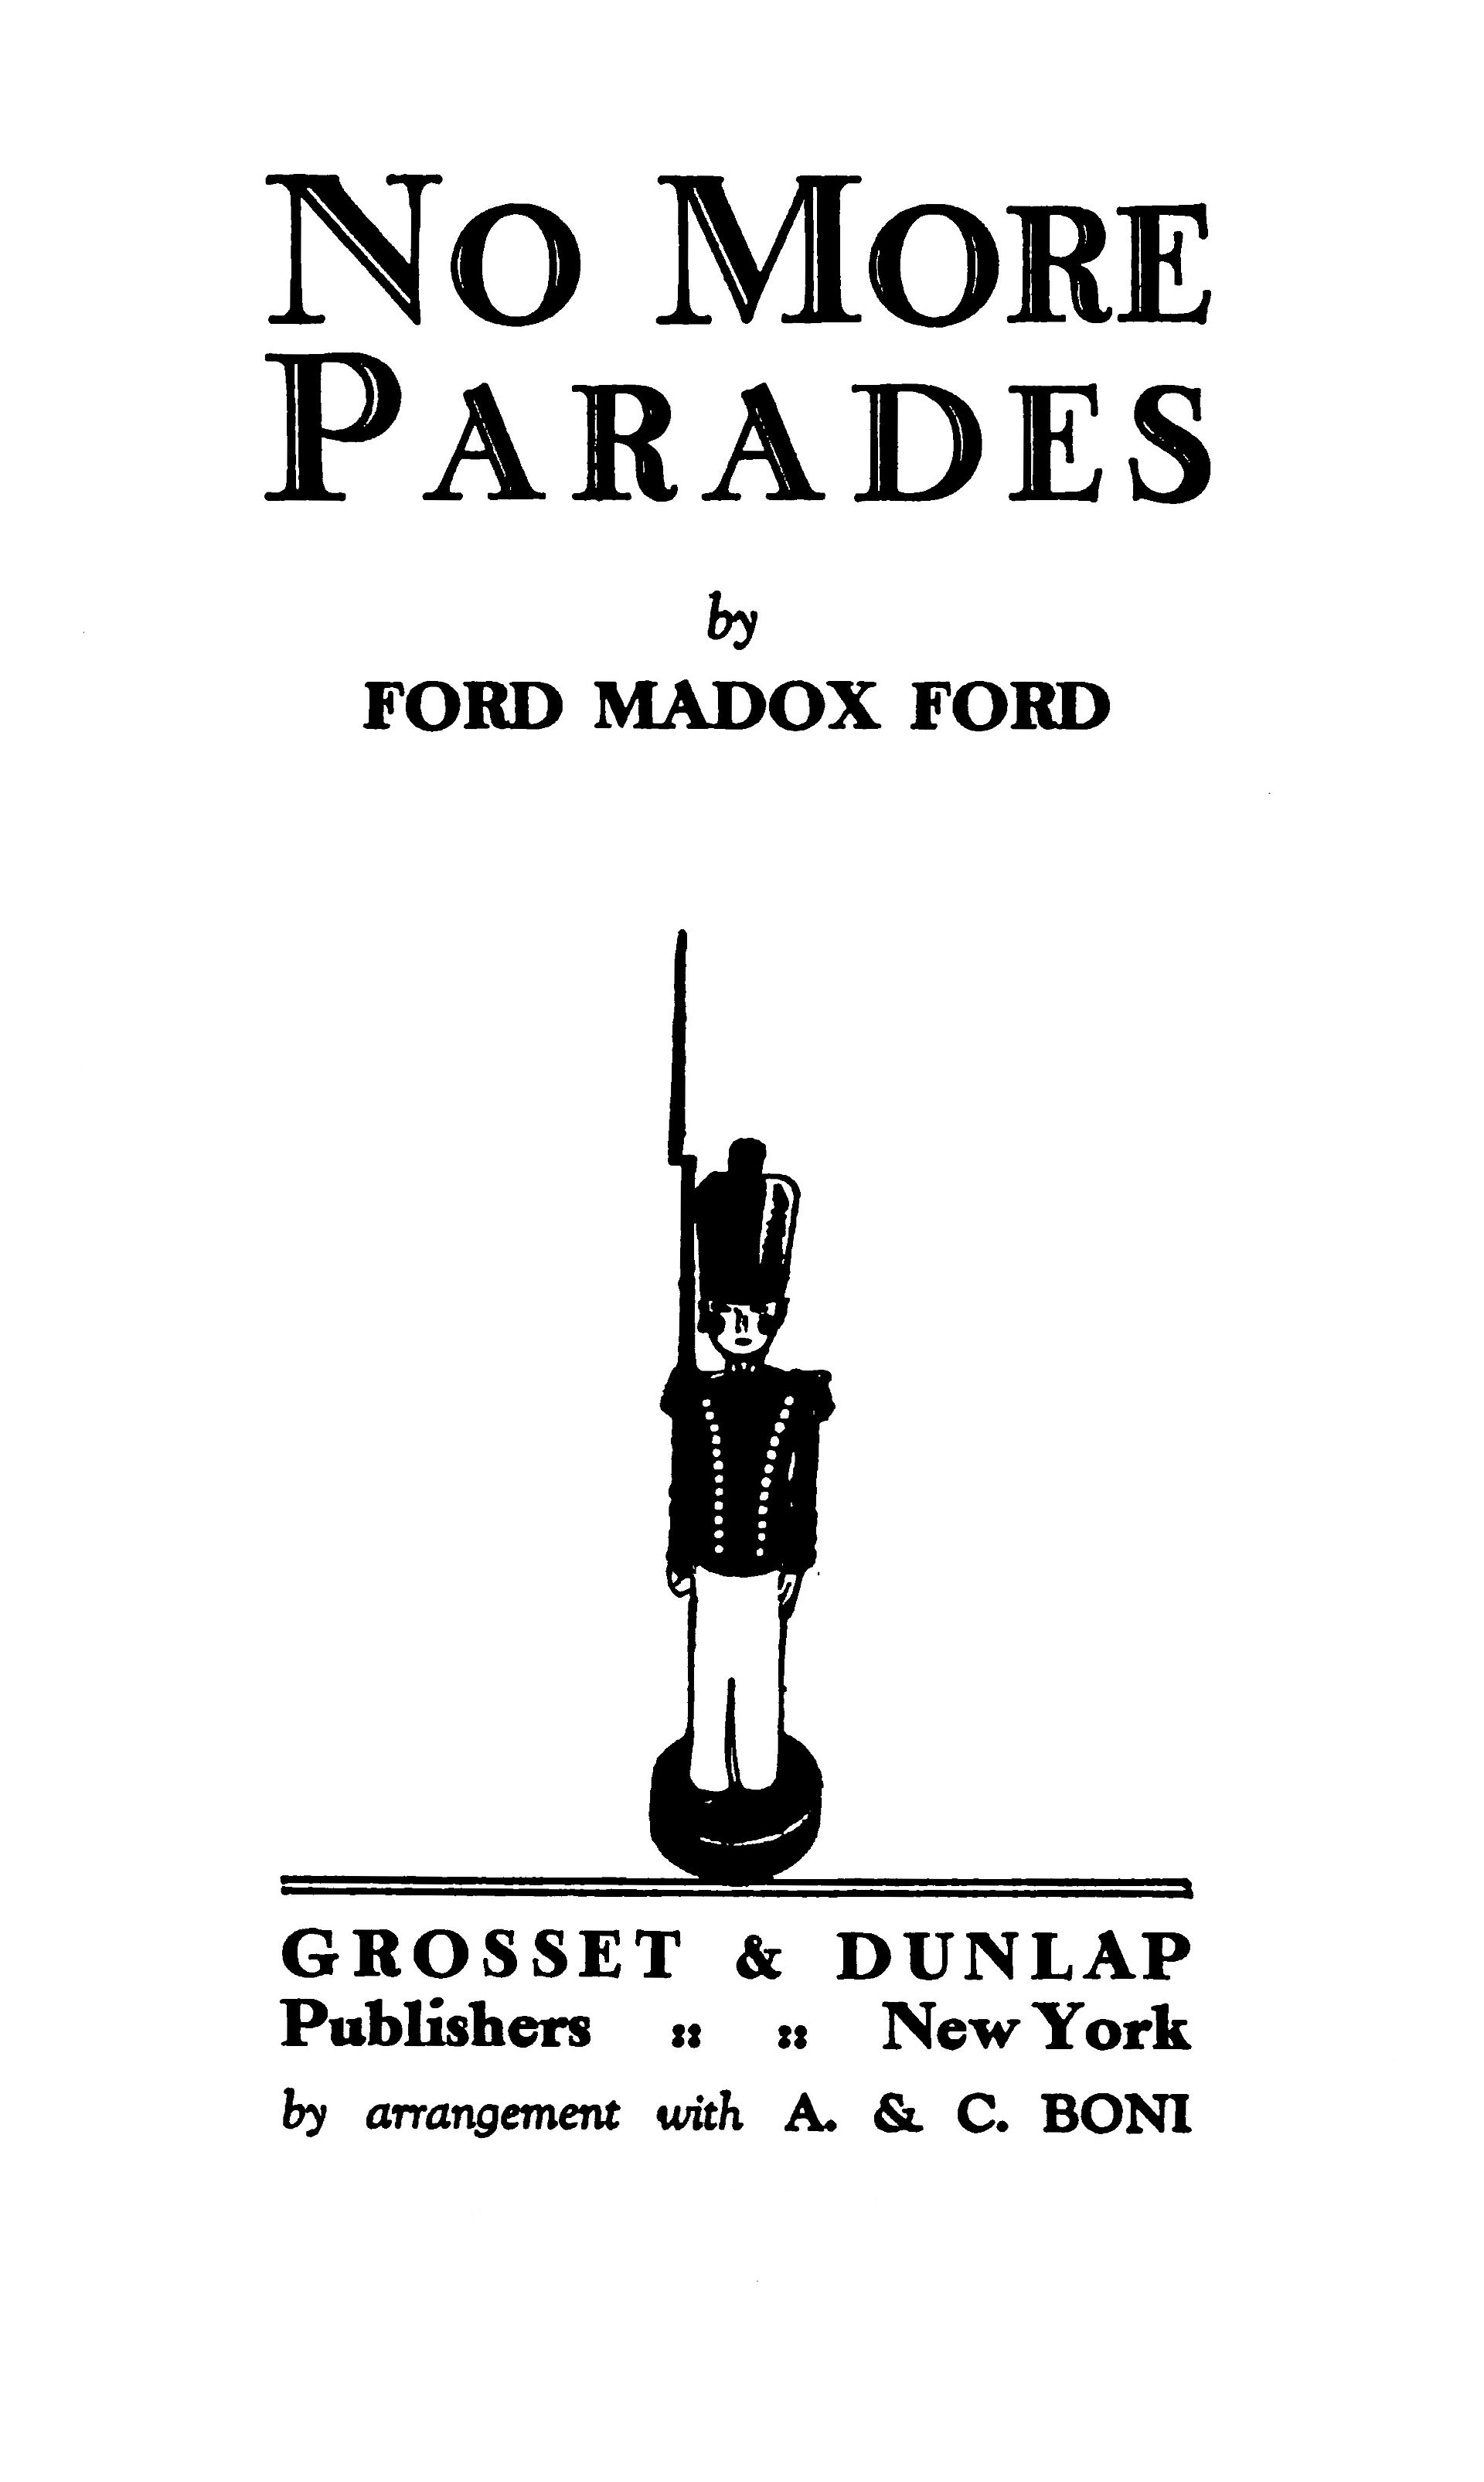 The Project Gutenberg eBook of No More Parades, by Ford Madox Ford.